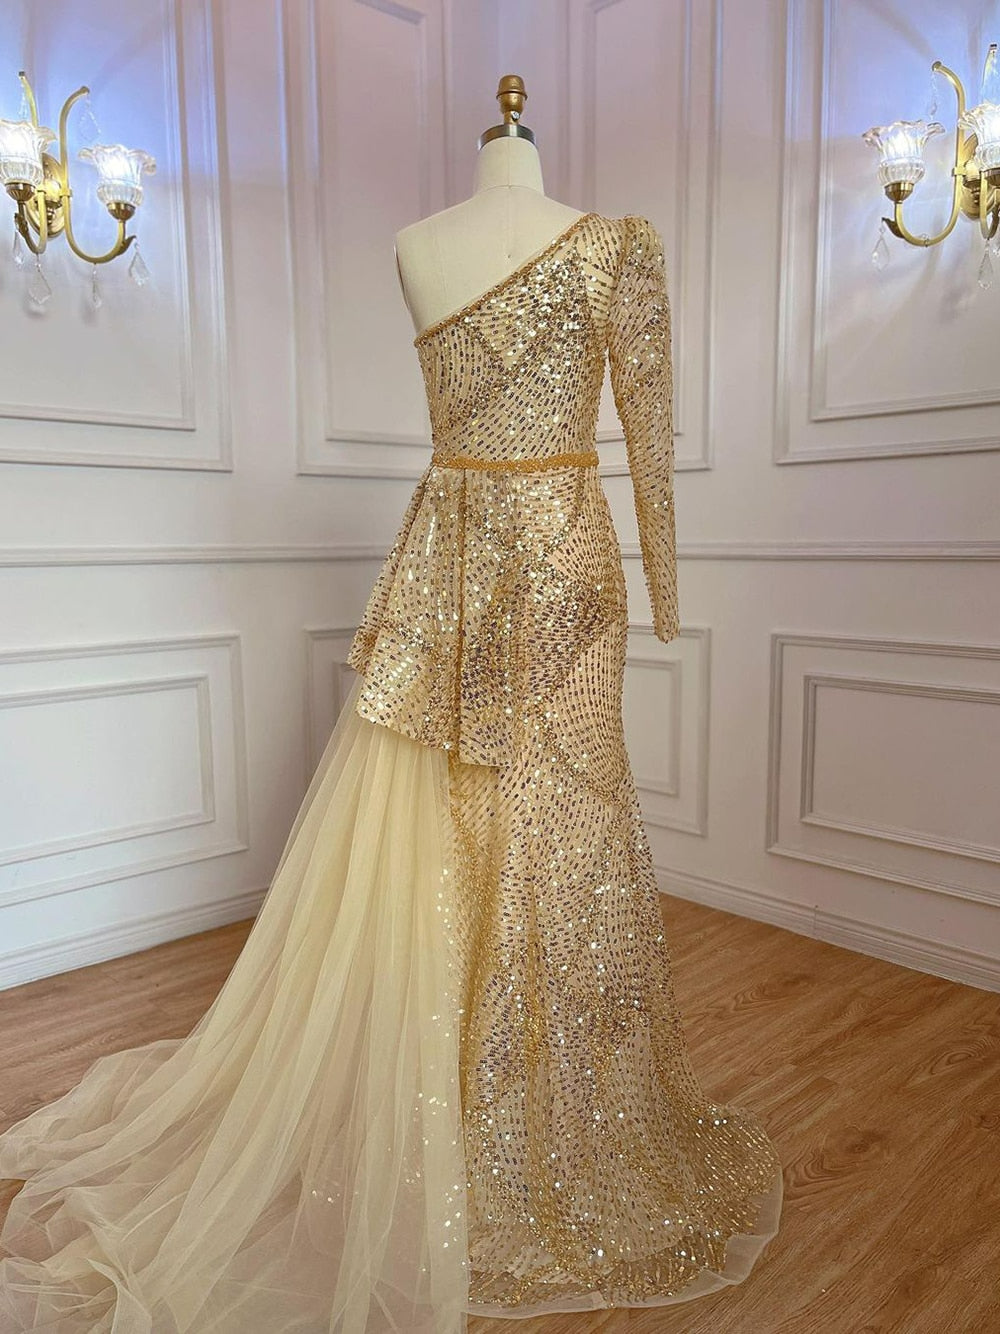 Gold Elegant Mermaid Sexy One Shoulder High Split Beaded Luxury Evening Dresses Gowns For Women Party LA71890